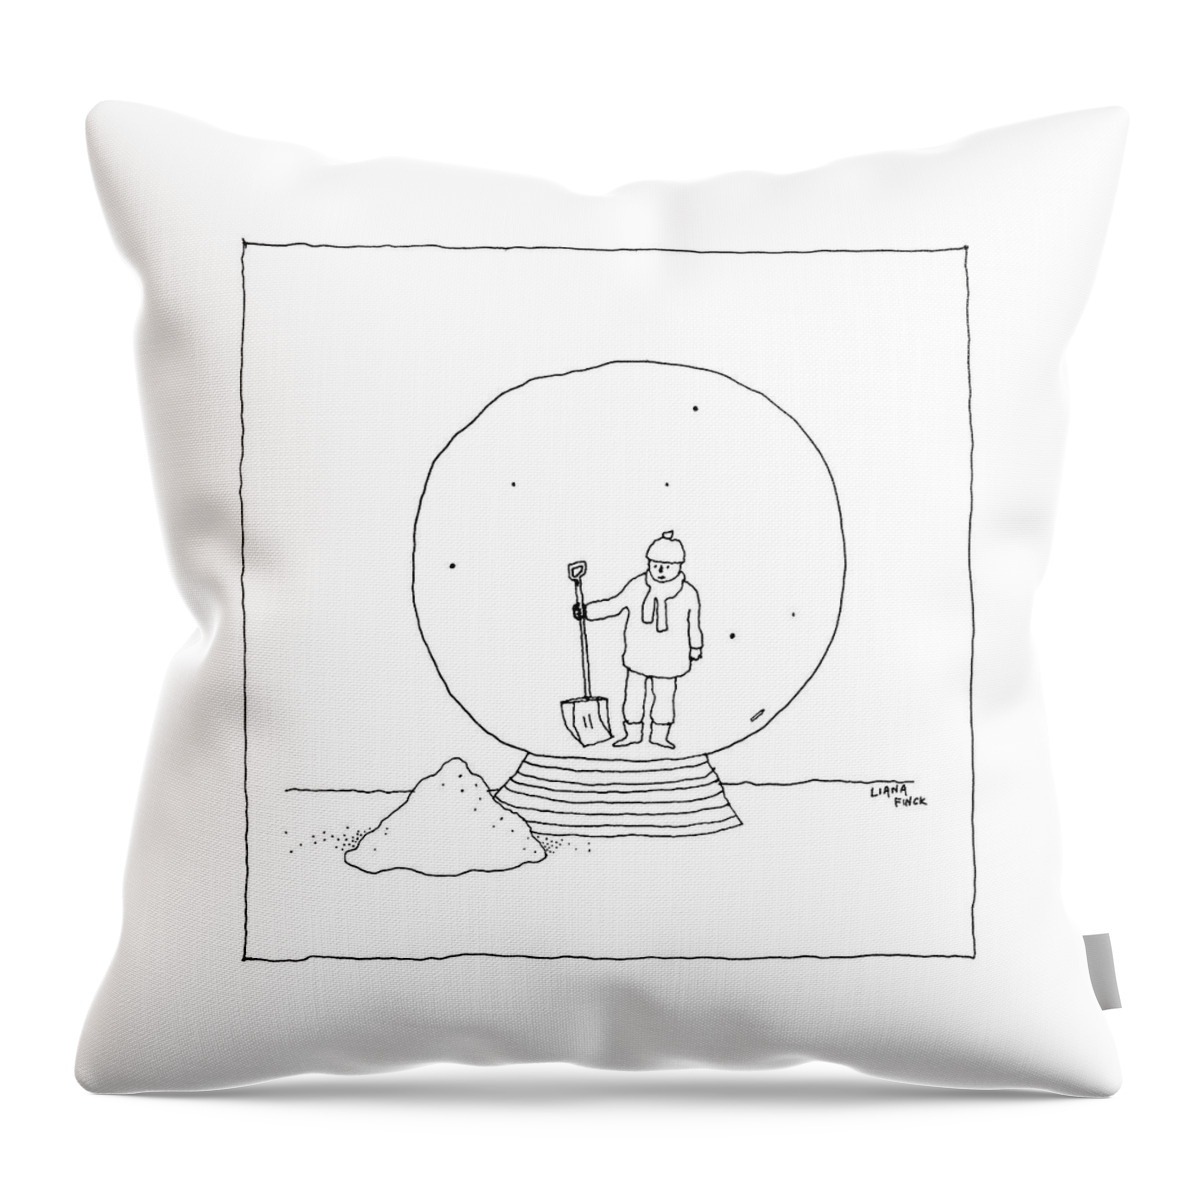 New Yorker February 7, 2022 Throw Pillow